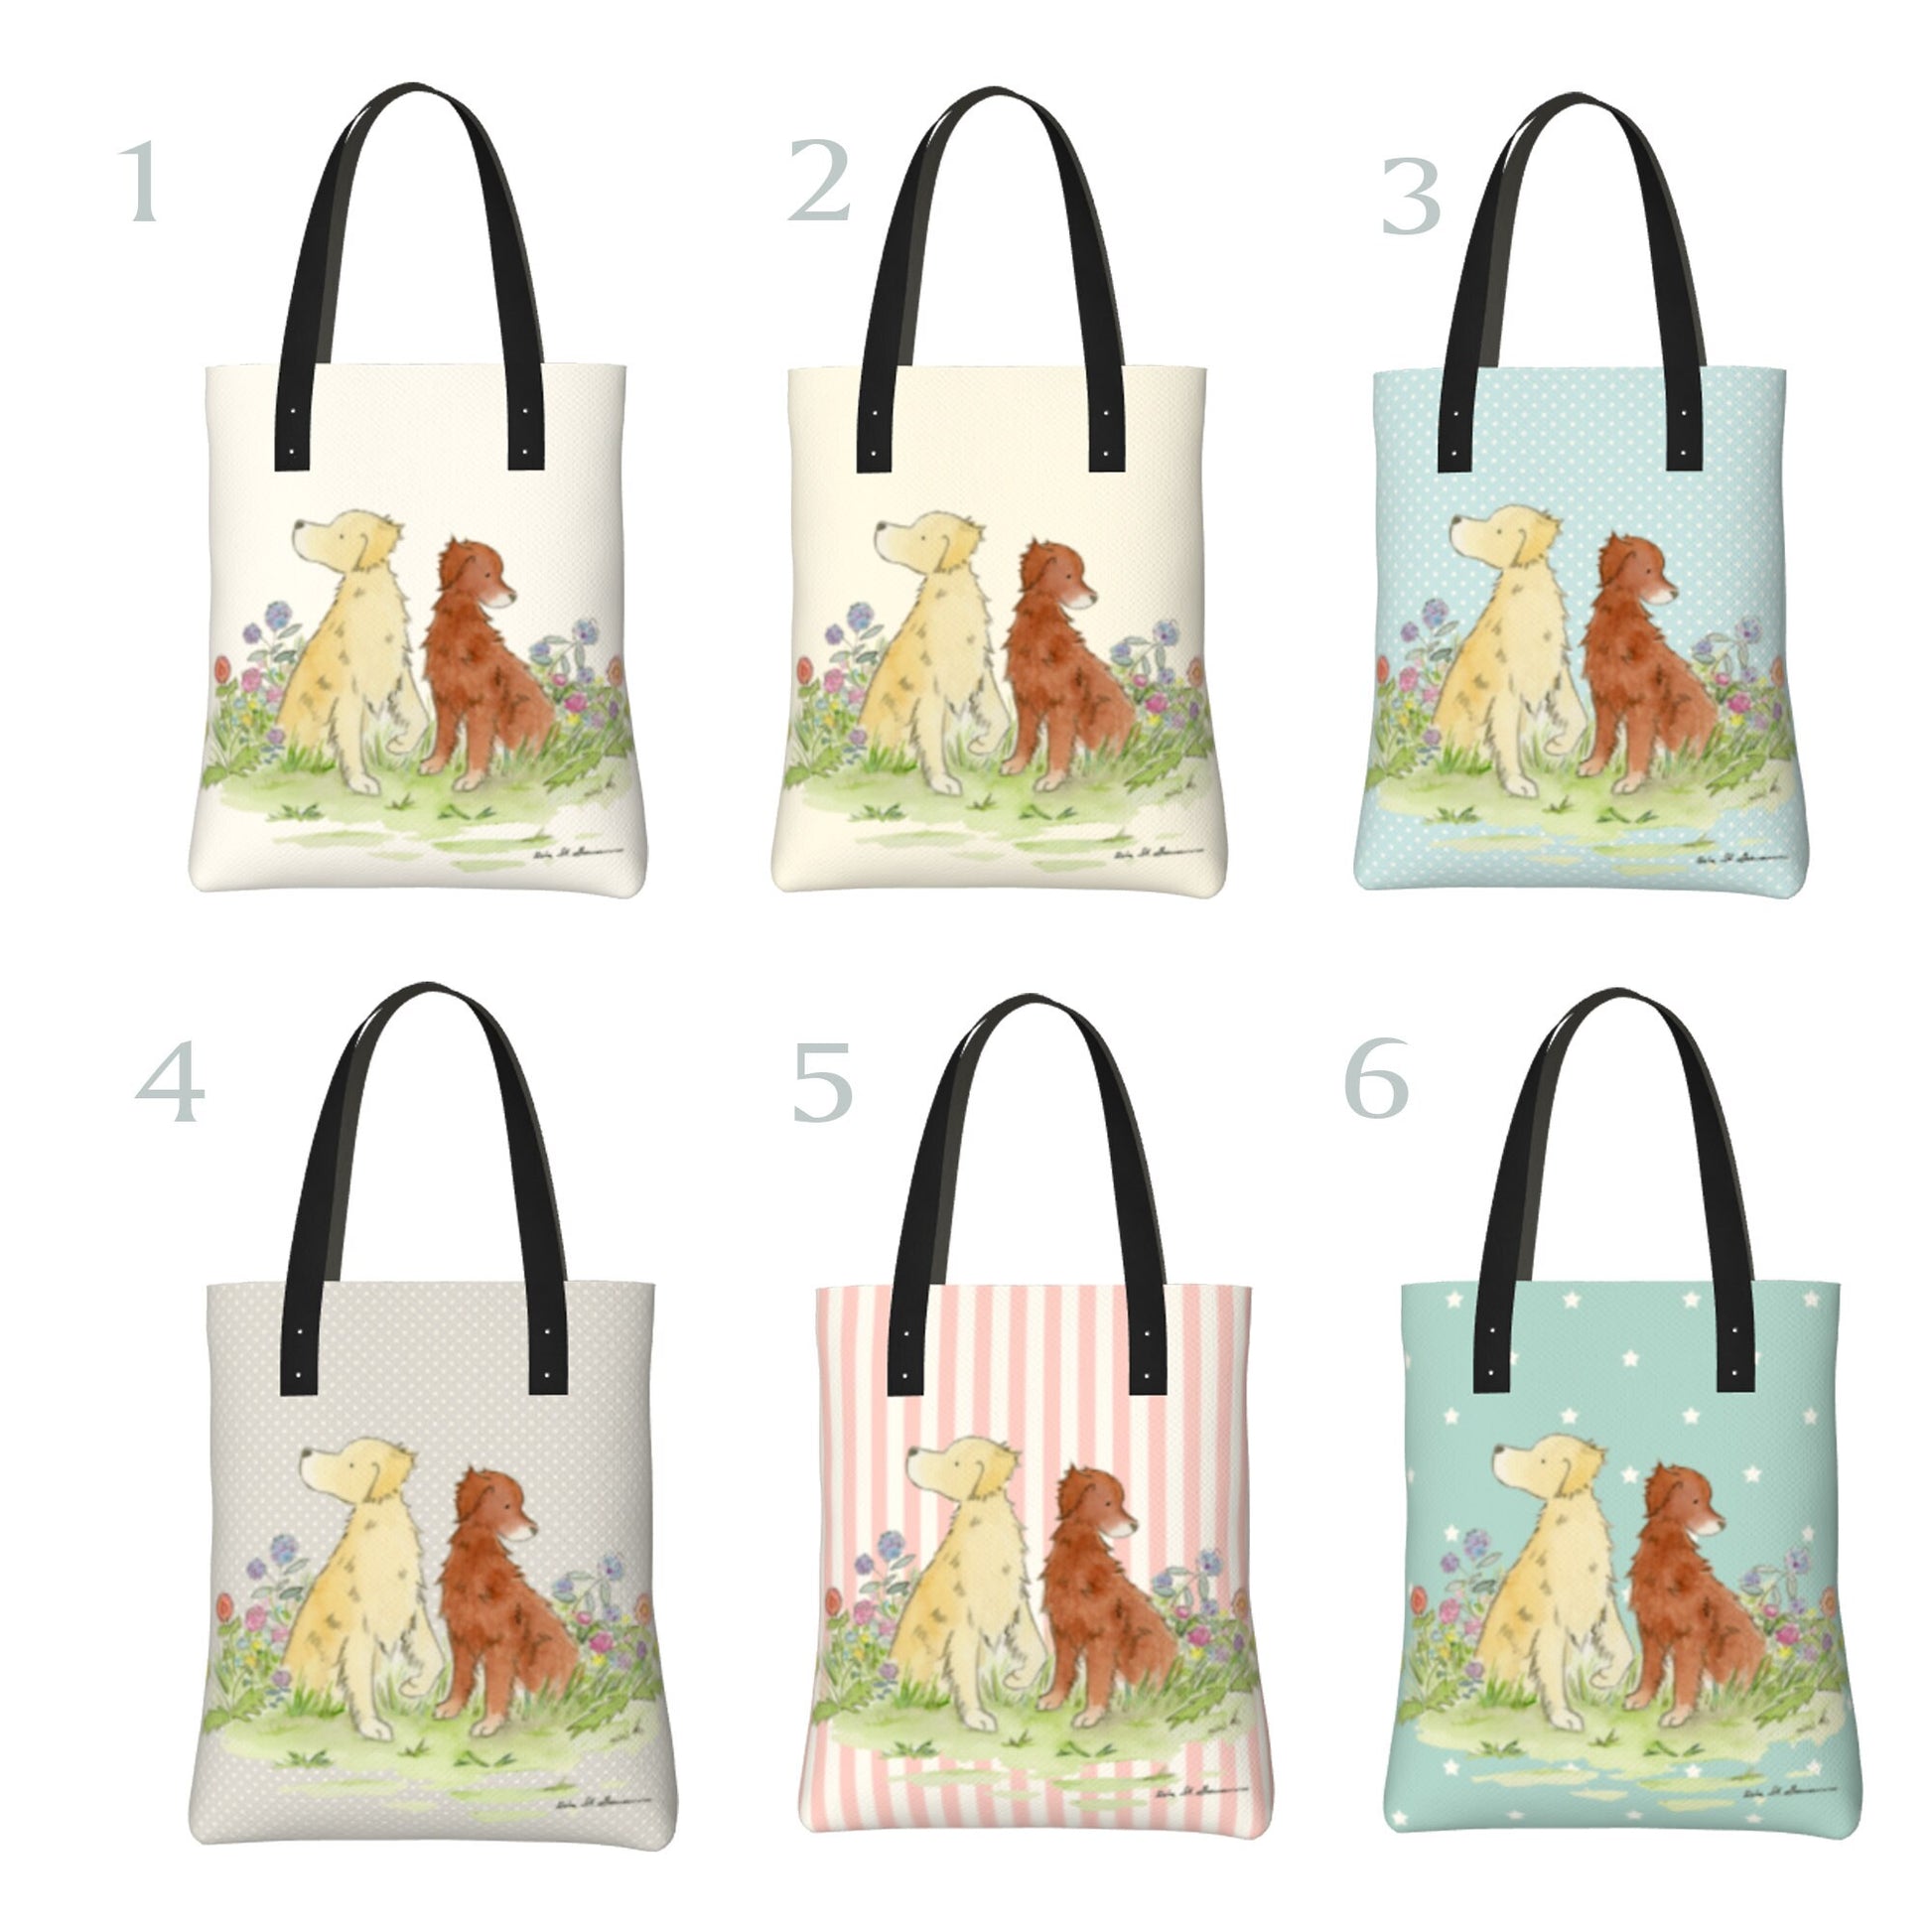 Golden Retriever Tote Bag, Dog Tote, Lined Tote, Dog Purse, Golden Retriever Gift, Golden Lover, Golden Present, Golden Handbag, Dog Handbag